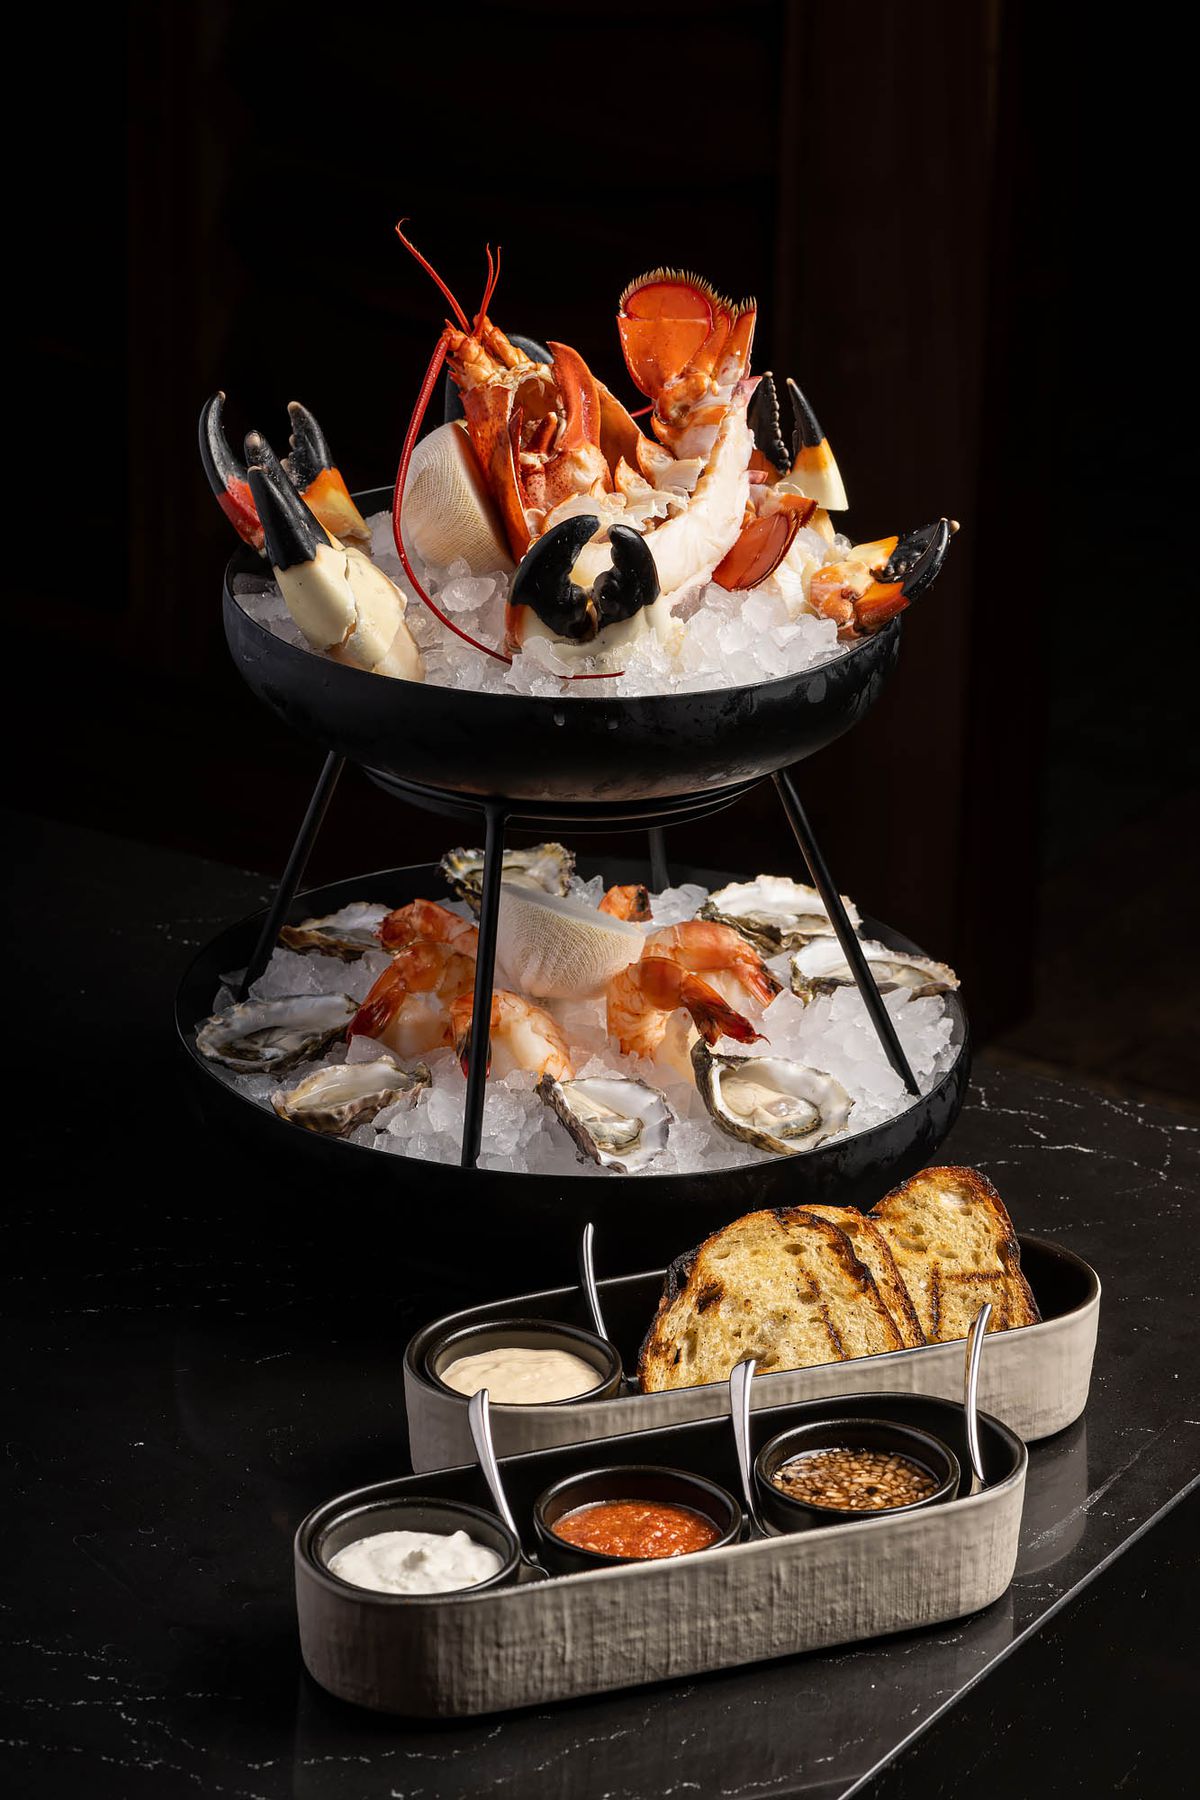 A seafood platter with oysters, shrimp, lobster, and stone crab claws at Leña in Los Angeles, California.